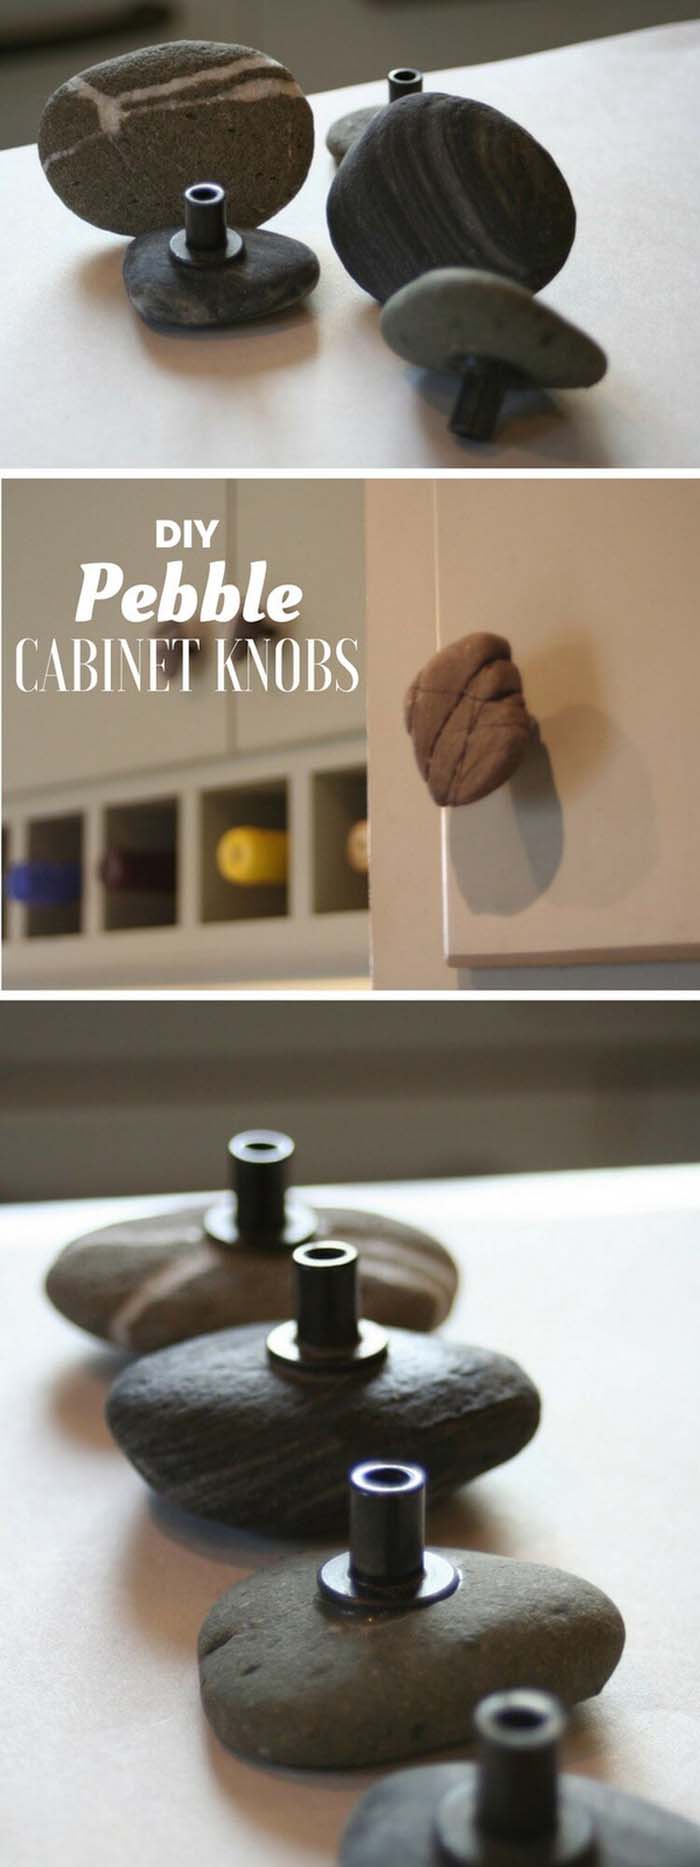 Switch Out Your Cabinet Knobs with Pretty Polished Stones #homedecor #pebbles #rocks #decorhomeideas